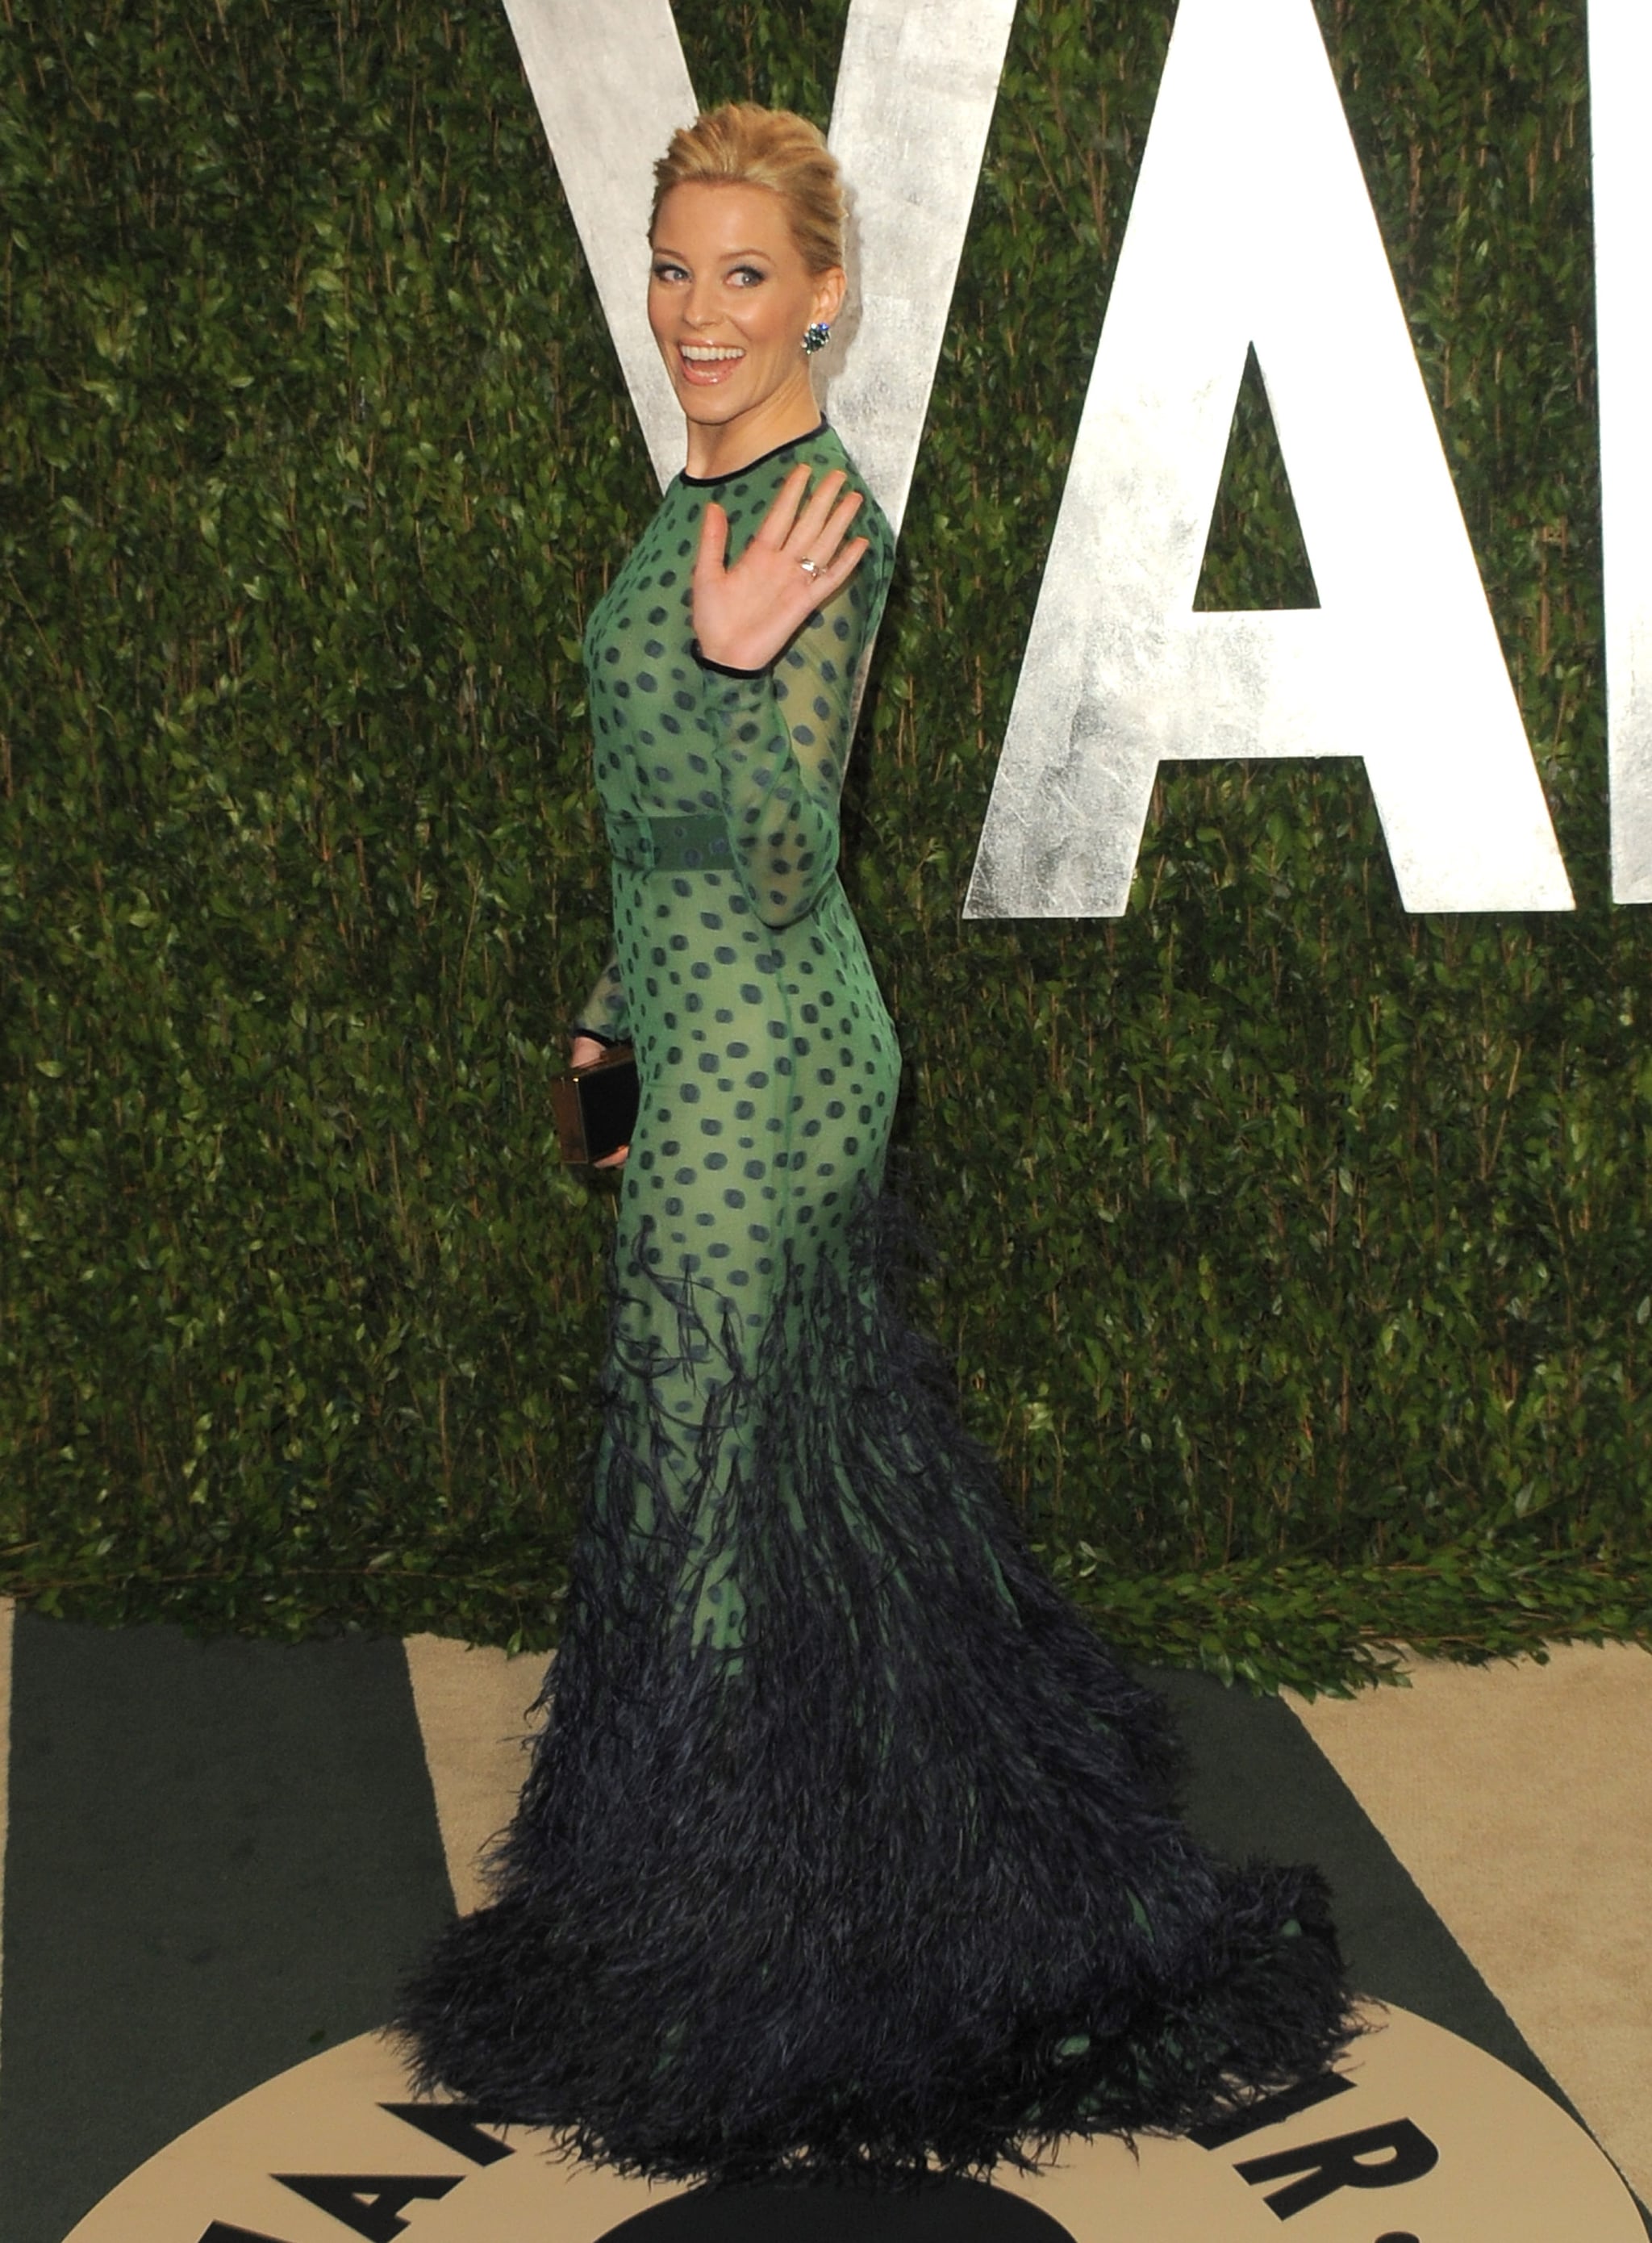 Elizabeth Banks in peacock-inspired Chadwick Bell gown gives a wave on the Vanity Fair carpet.